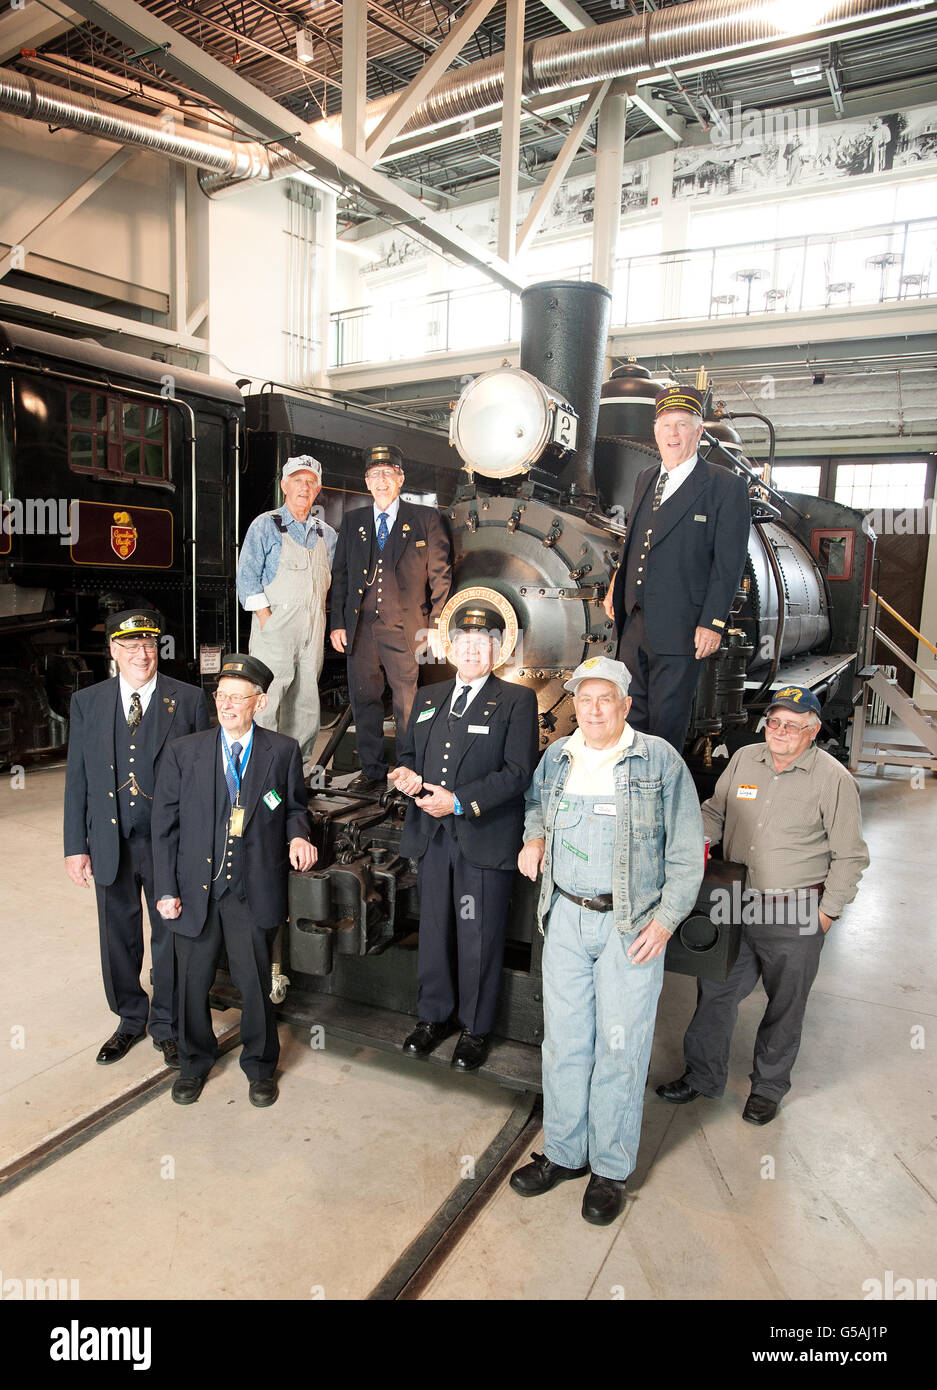 Volunteers restorers pose in period railroad uniforms with a newly restored 1903 train engine at the West Coast Railway Museum Stock Photo